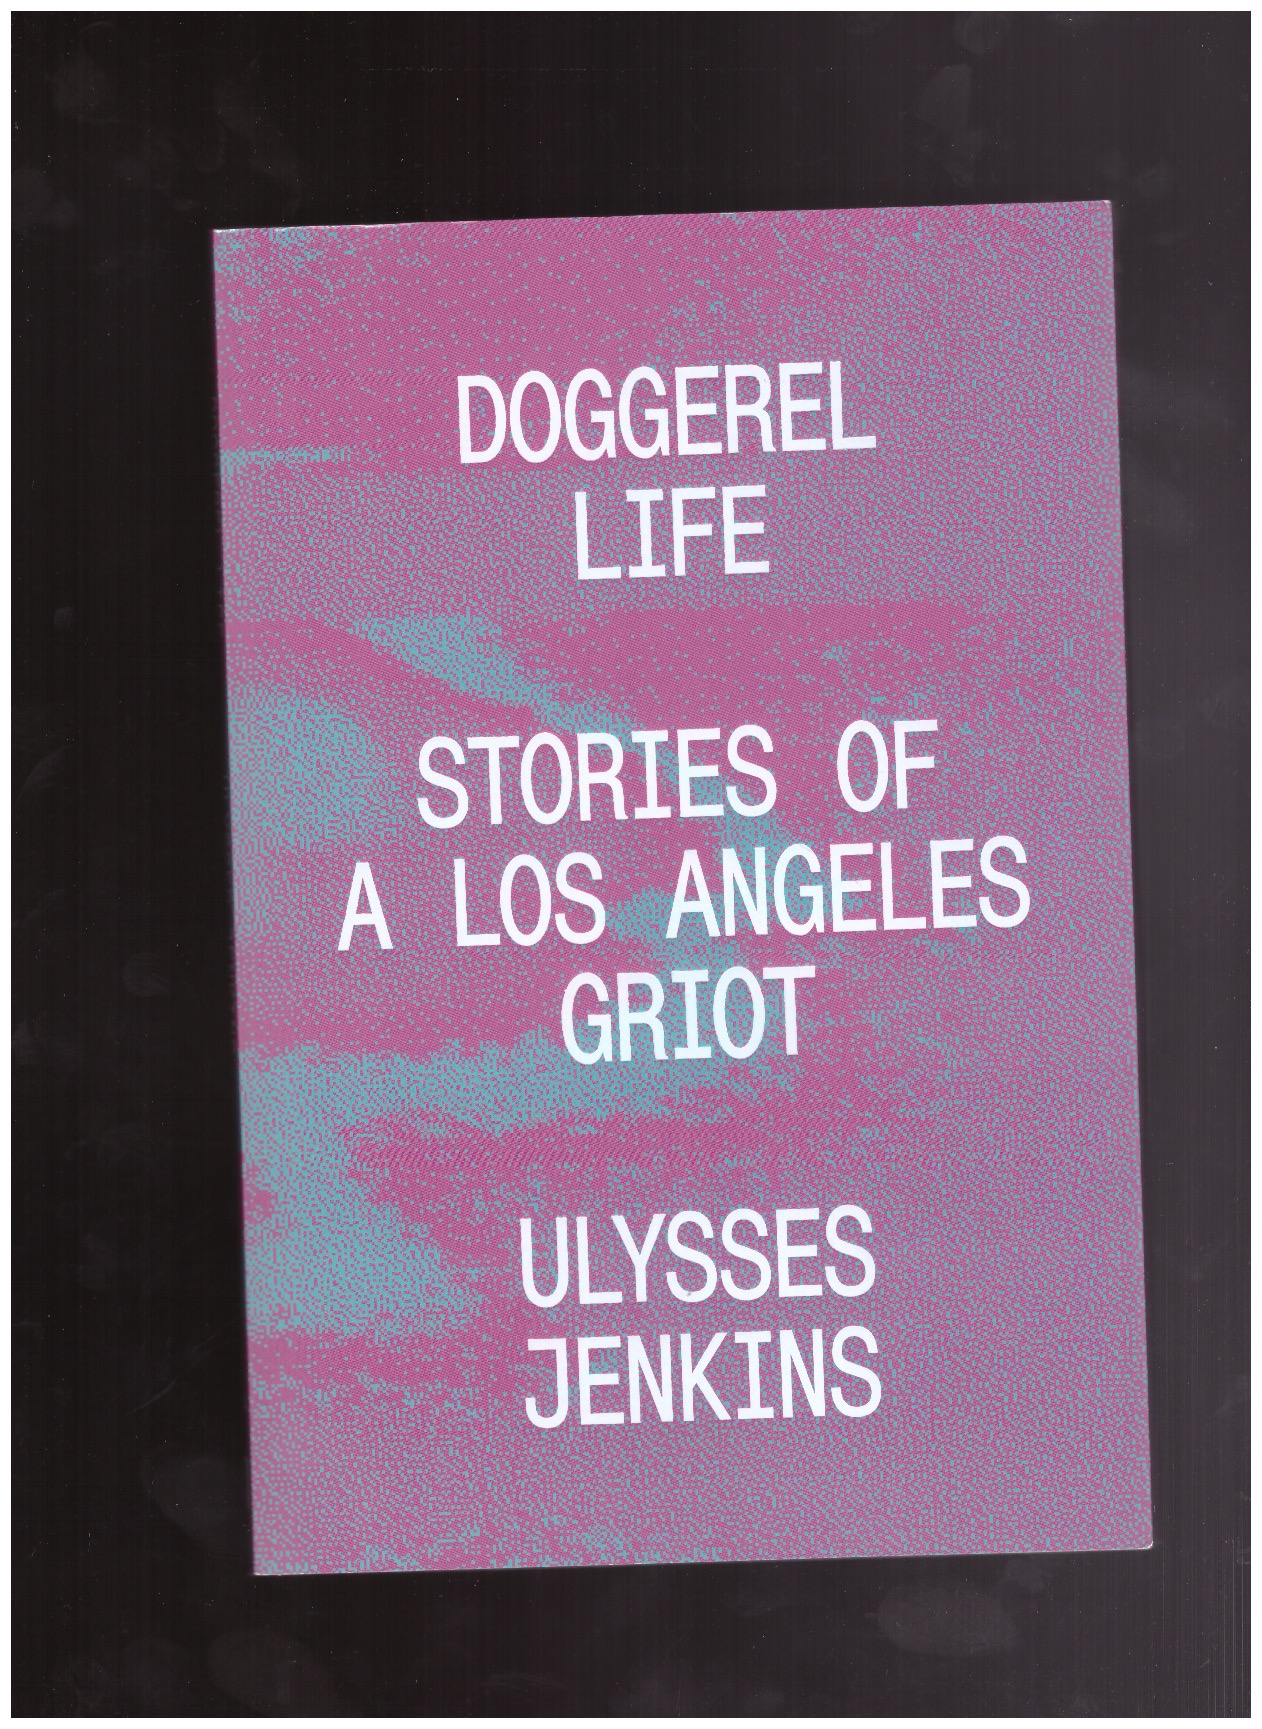 JENKINS, Ulysses - Doggerel Life - Stories of a Los Angeles Griot